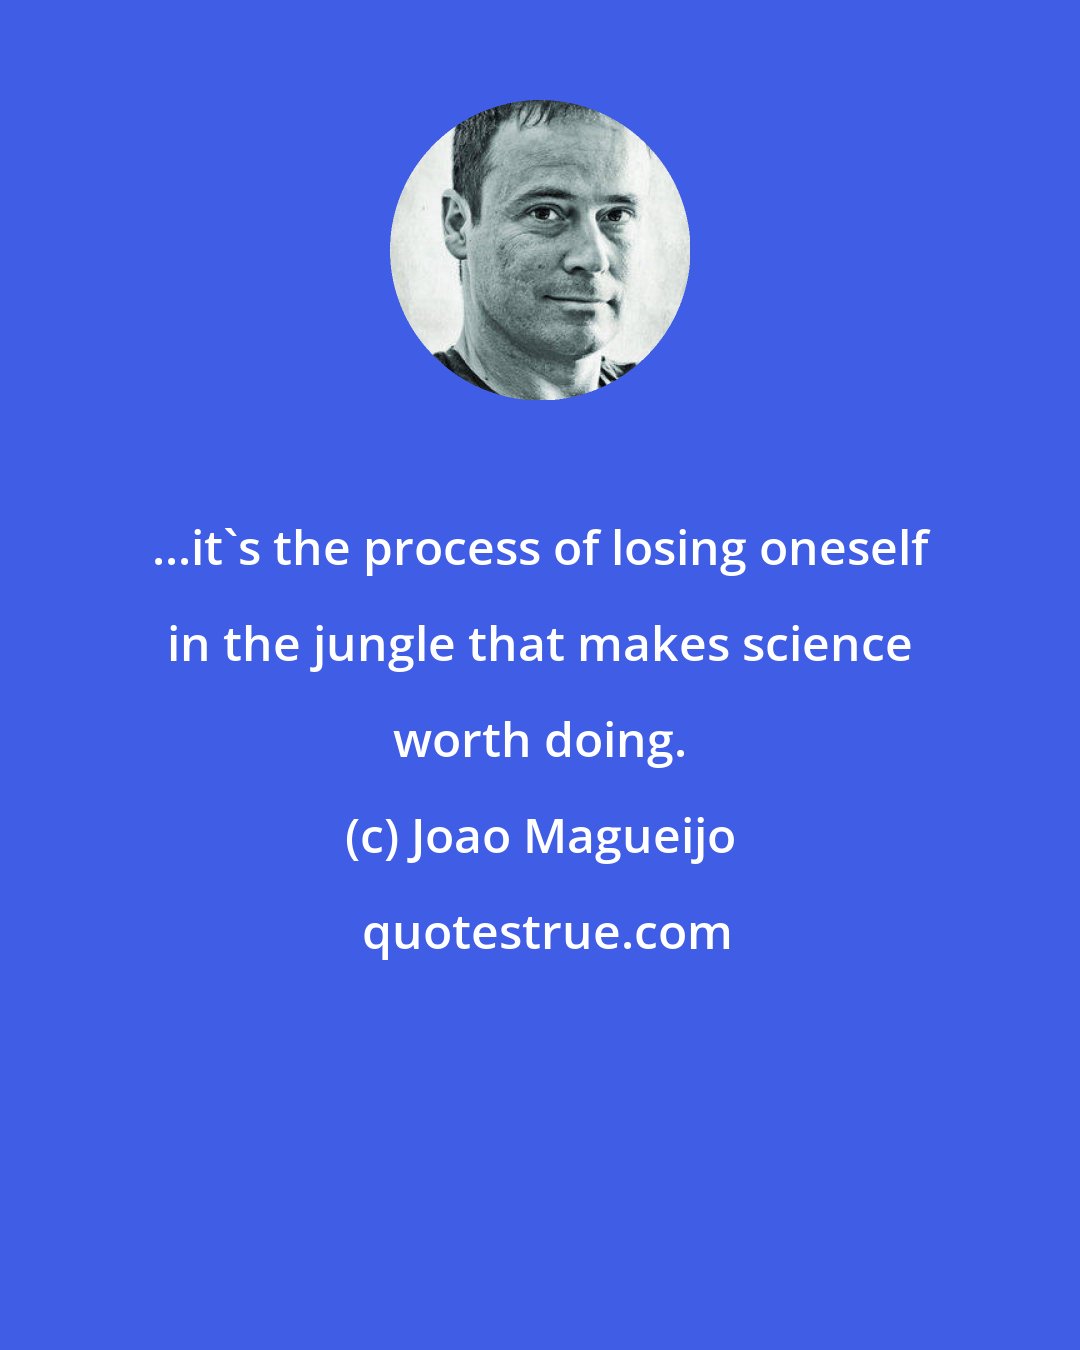 Joao Magueijo: ...it's the process of losing oneself in the jungle that makes science worth doing.